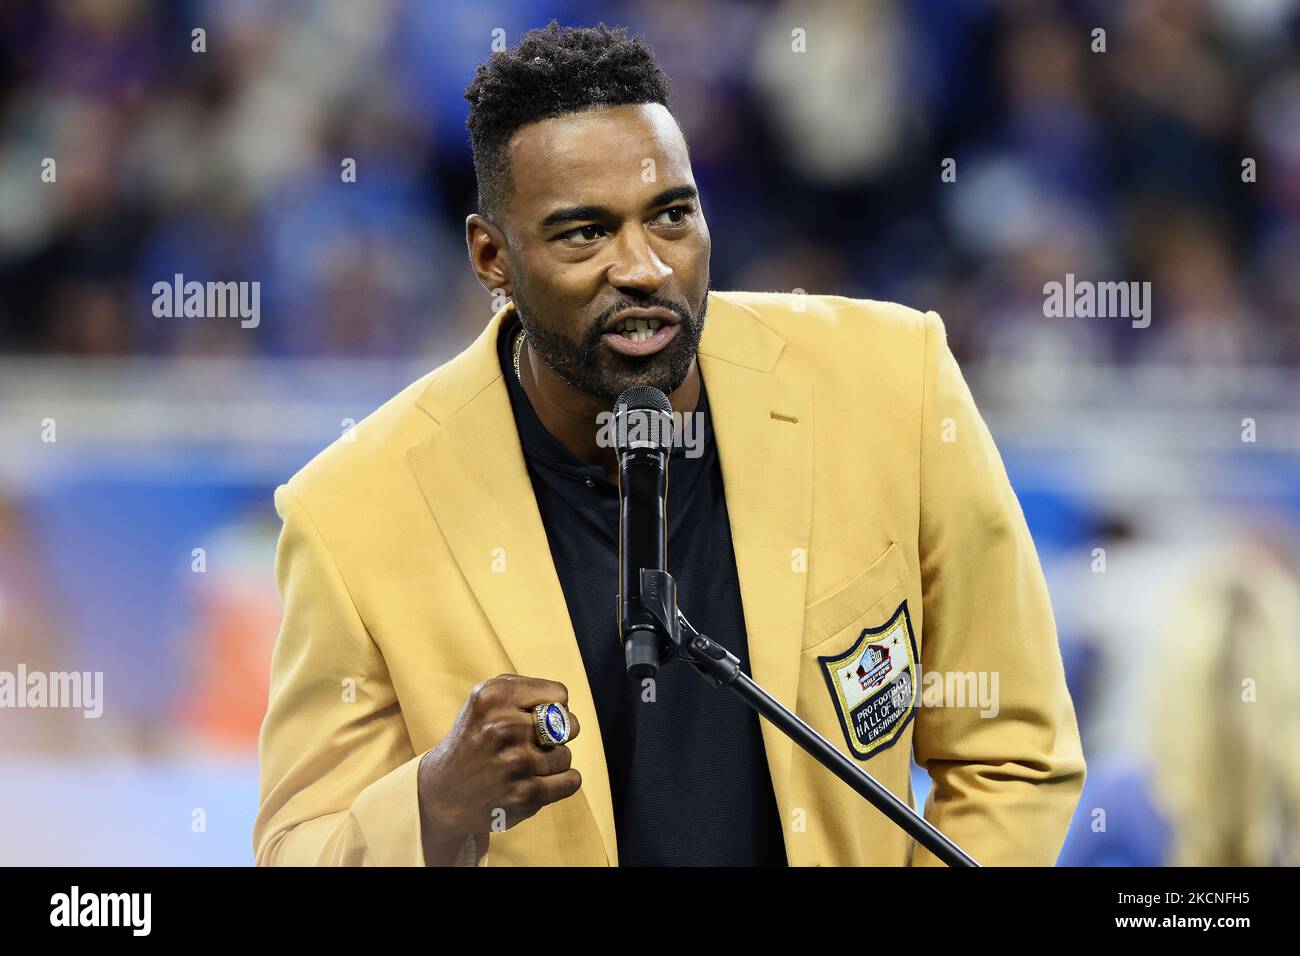 Former Detroit Lions wide receiver Calvin Johnson, Jr., “Megatron”, speaks after receiving his Hall of Fame ring during an NFL football game between the Detroit Lions and the Baltimore Ravens in Detroit, Michigan USA, on Sunday, September 26, 2021. (Photo by Amy Lemus/NurPhoto) Stock Photo